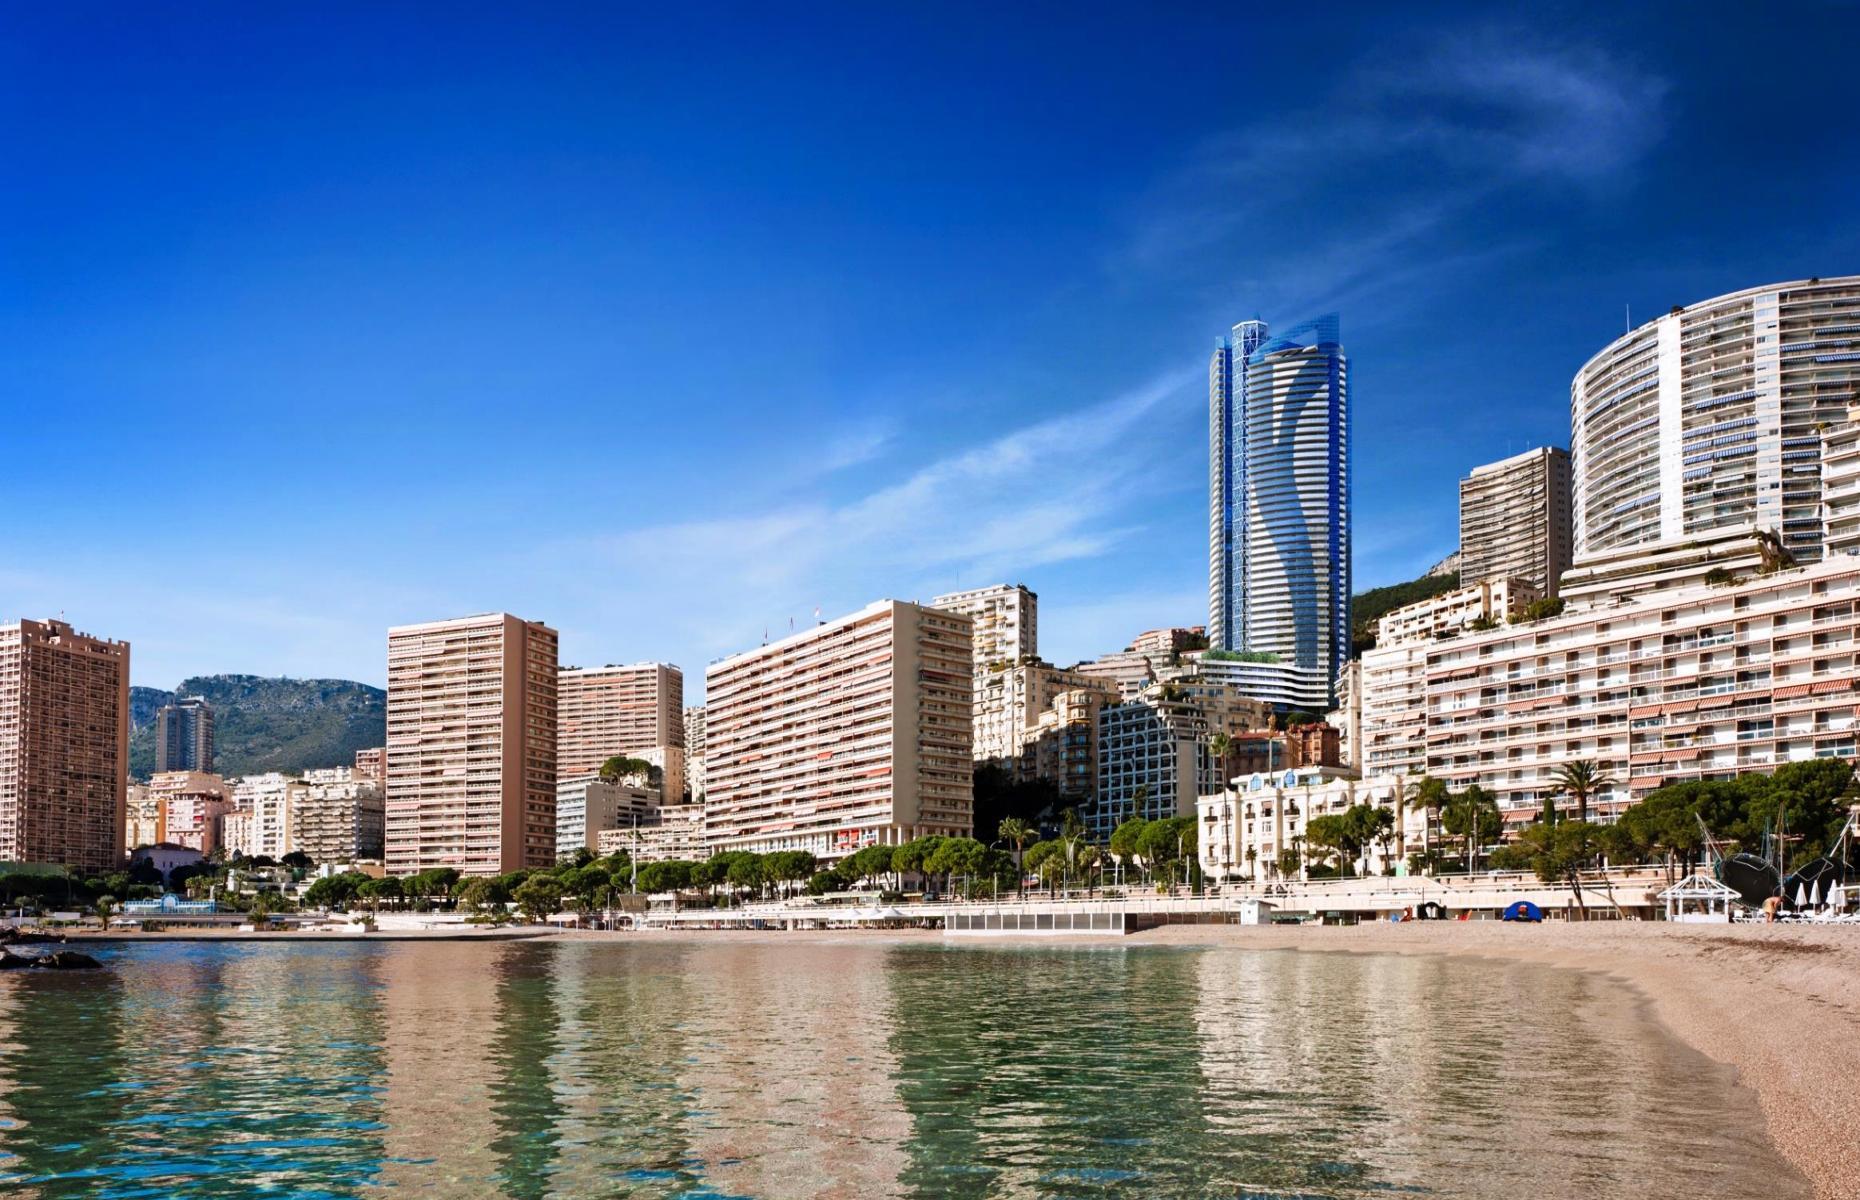 <p>It was dubbed the most expensive penthouse in the world when it returned to the market in September 2021. Gracing the top floor of Monaco’s La Tour Odéon skyscraper, the five-story Sky Penthouse was on sale for <a href="https://www.thepinnaclelist.com/properties/tour-odeon-tower-sky-penthouse-principality-monaco/">a reported</a> $387 million. The 560-foot tower is the tallest building in Monaco and was designed by visionary architect Alexandre Giraldi. Let's explore... </p>